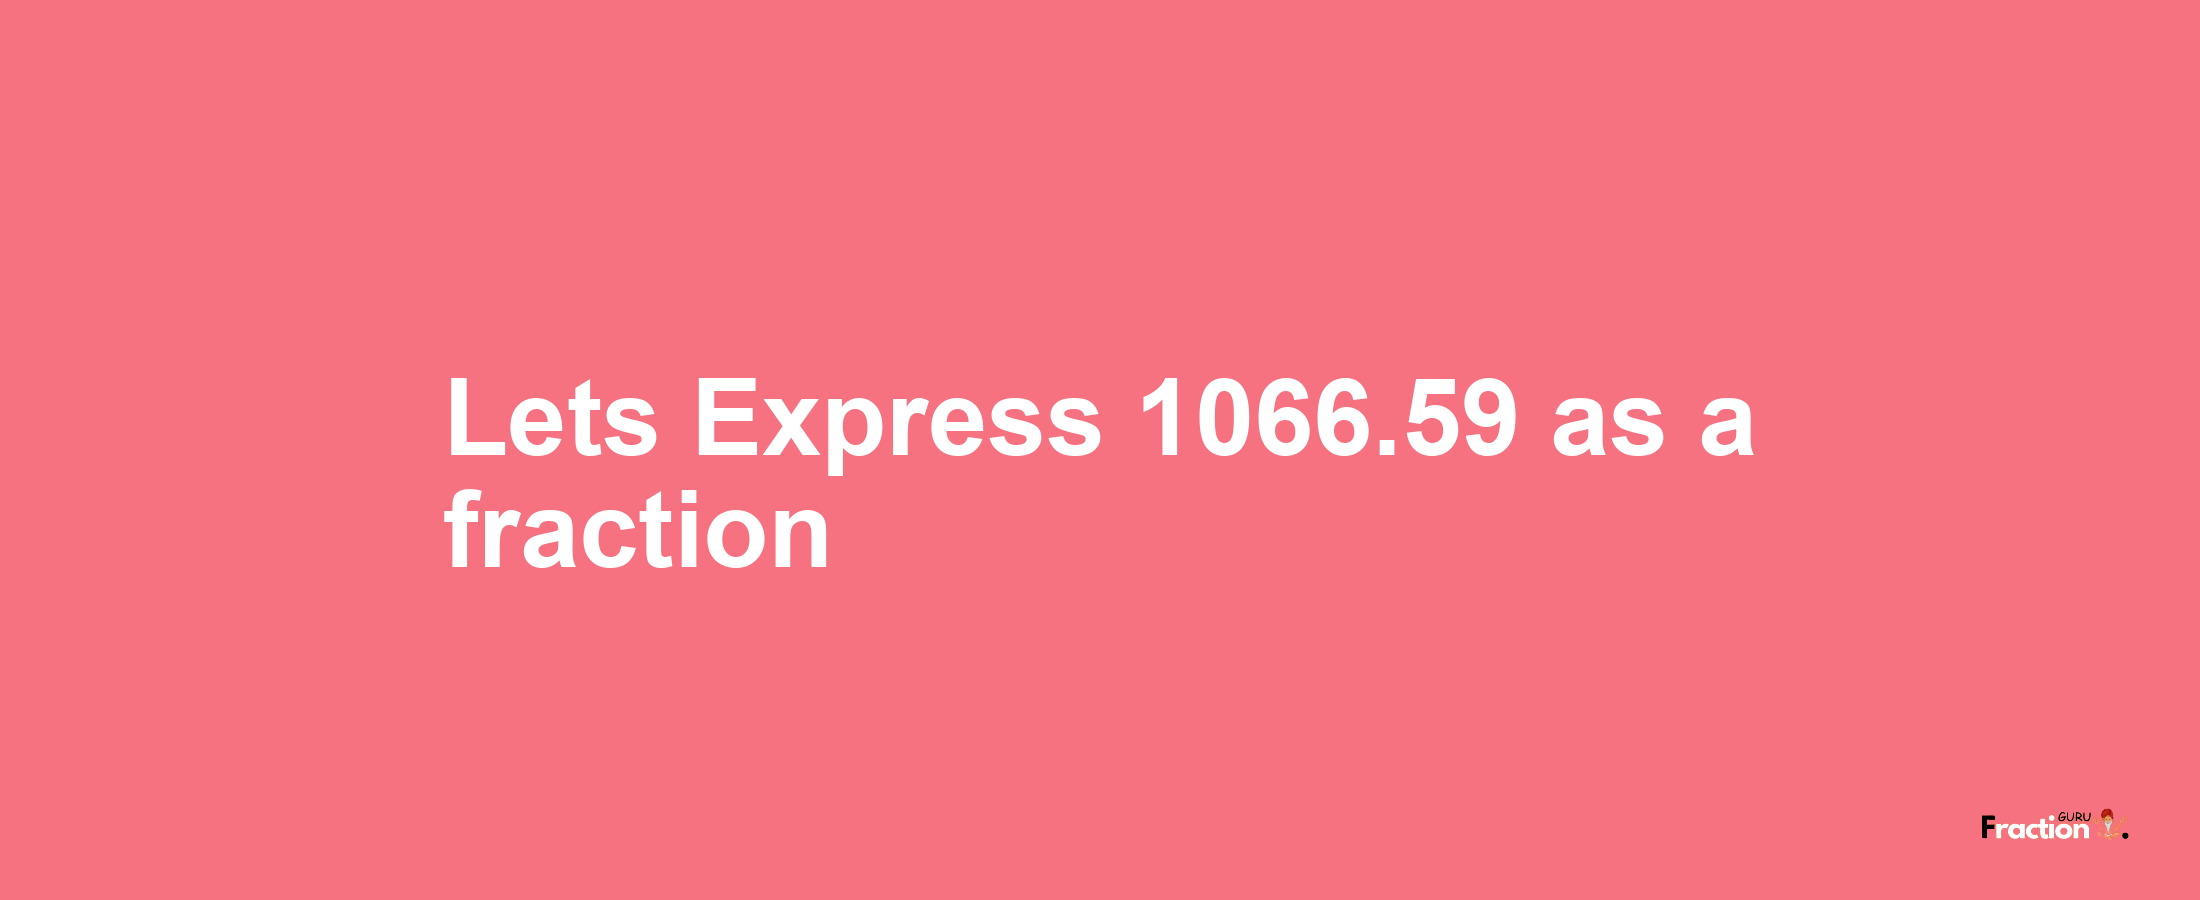 Lets Express 1066.59 as afraction